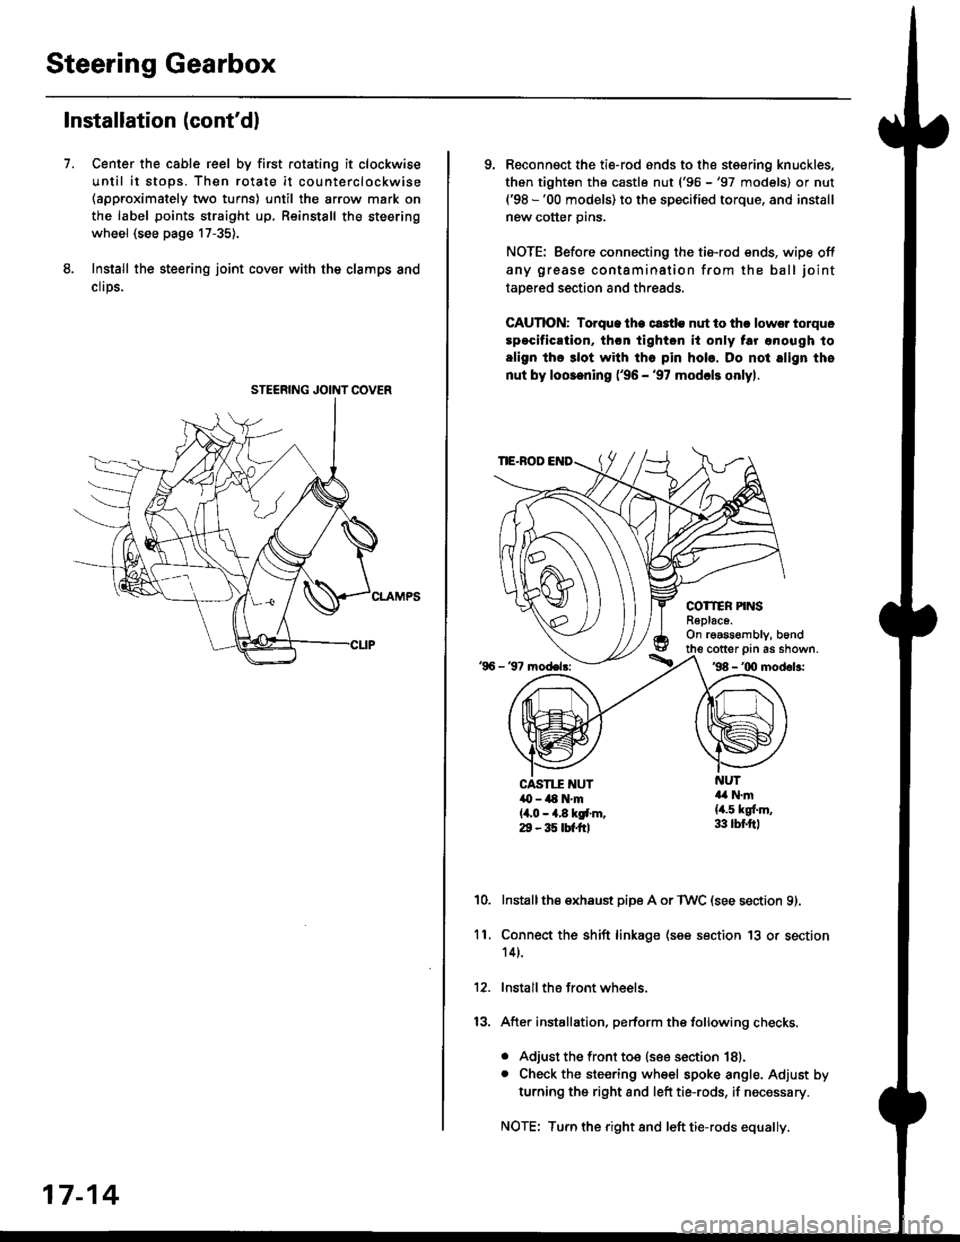 HONDA CIVIC 1996 6.G Workshop Manual Steering Gearbox
Installation (contdl
Center the cable reel by first rotating it clockwise
until it stops. Then rotate it counterclockwise(approximately two turns) until the arrow mark on
the label p